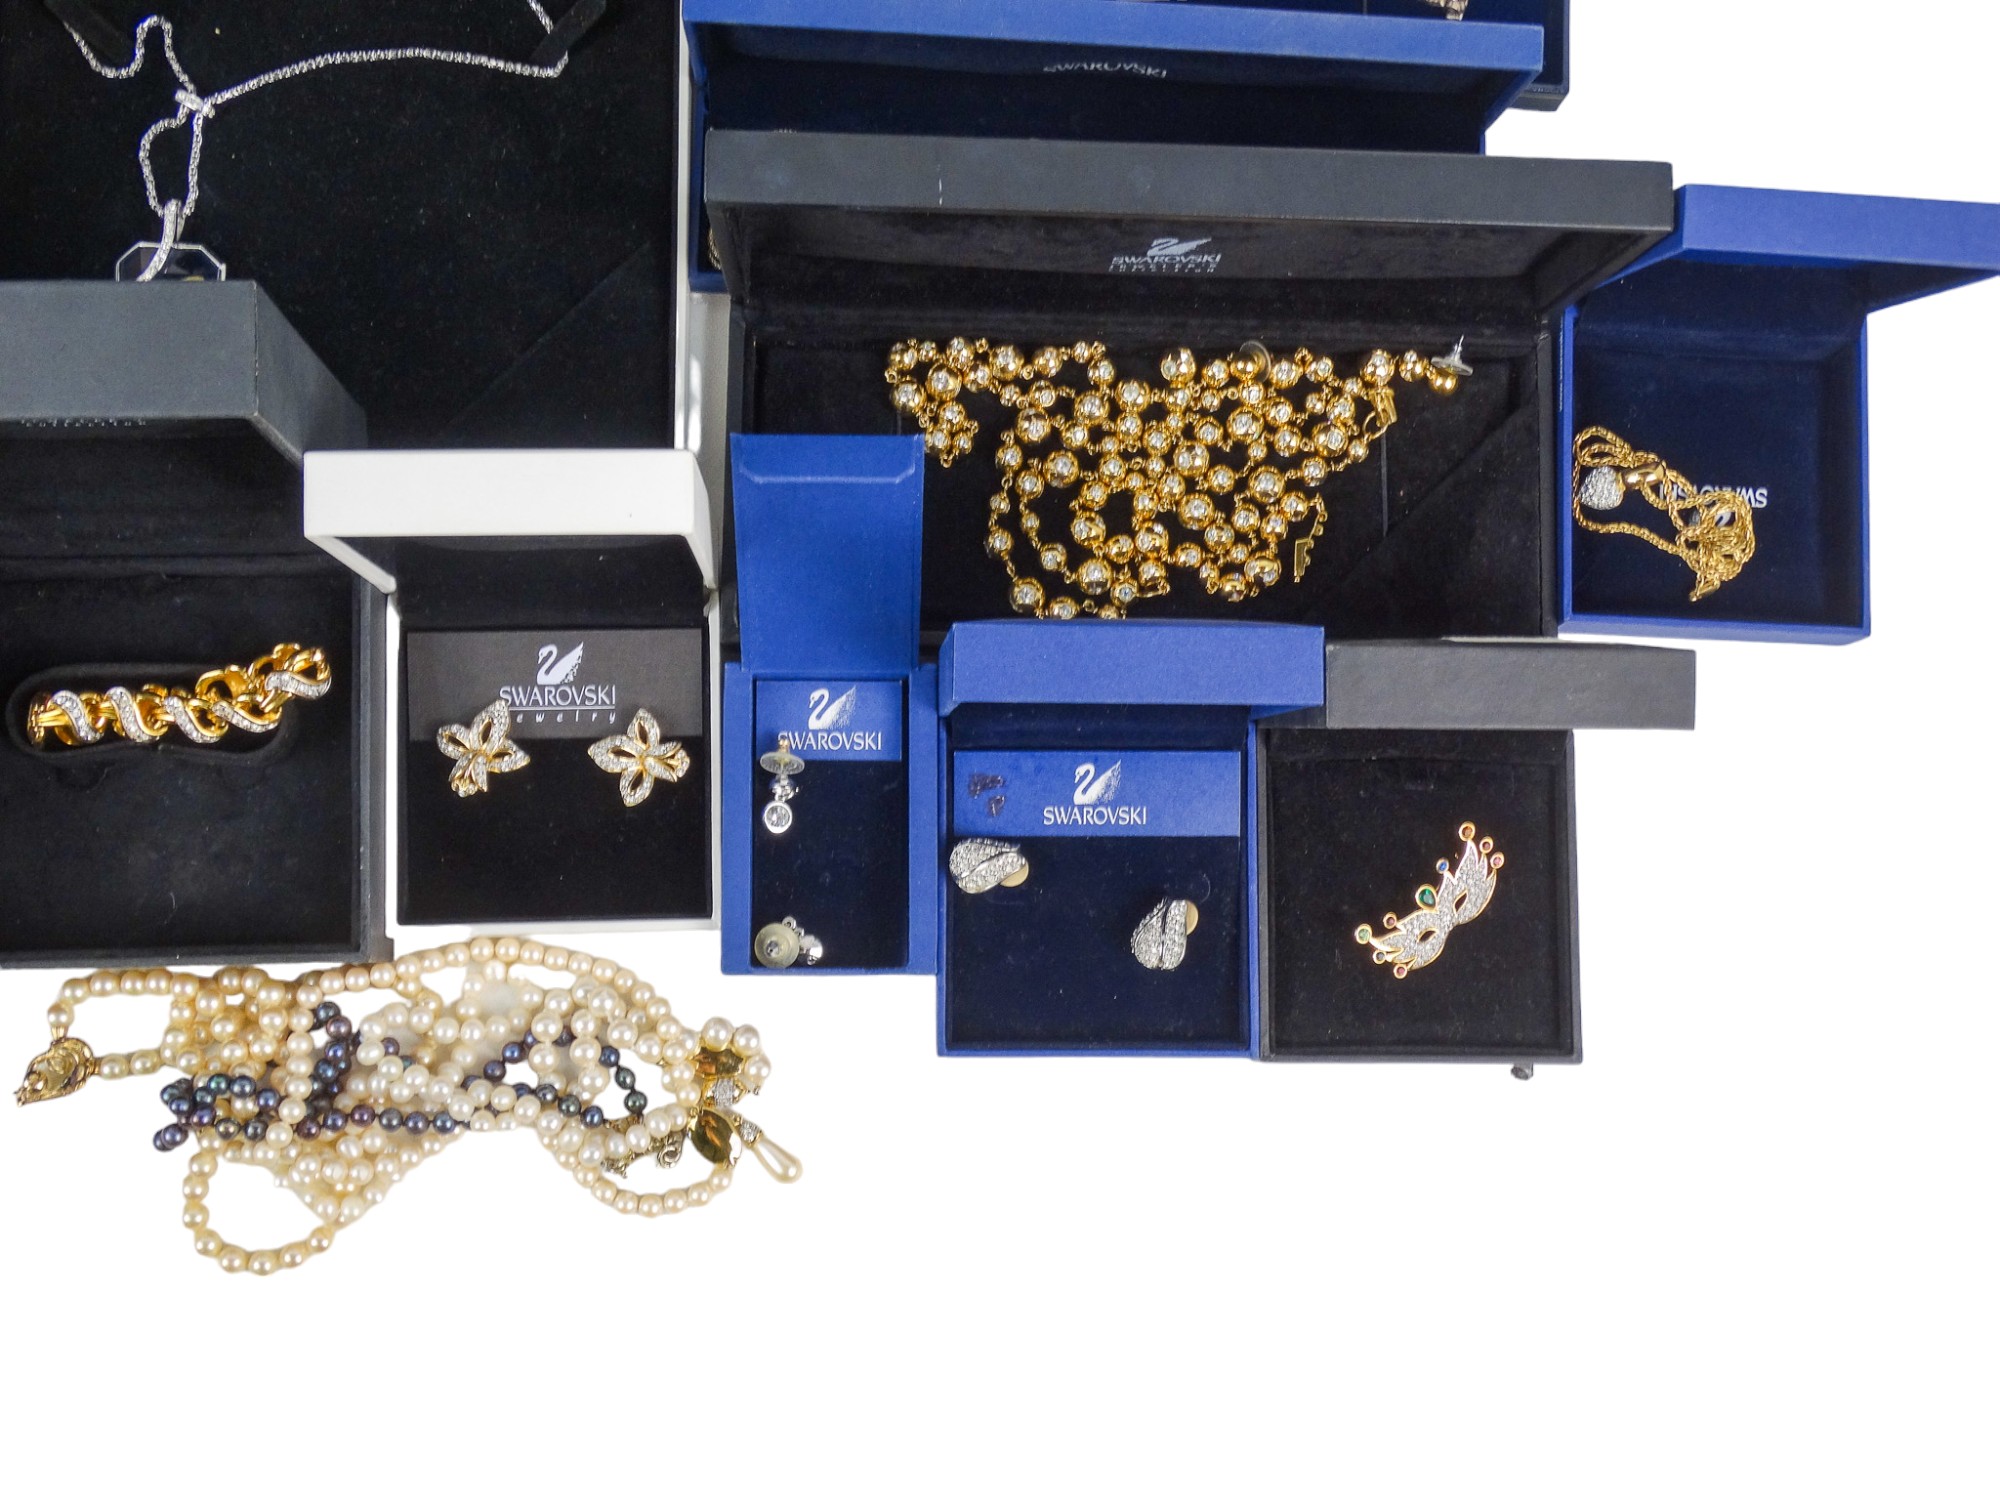 A quantity of Swarovski costume jewellery - many items with original retail boxes - Image 5 of 5